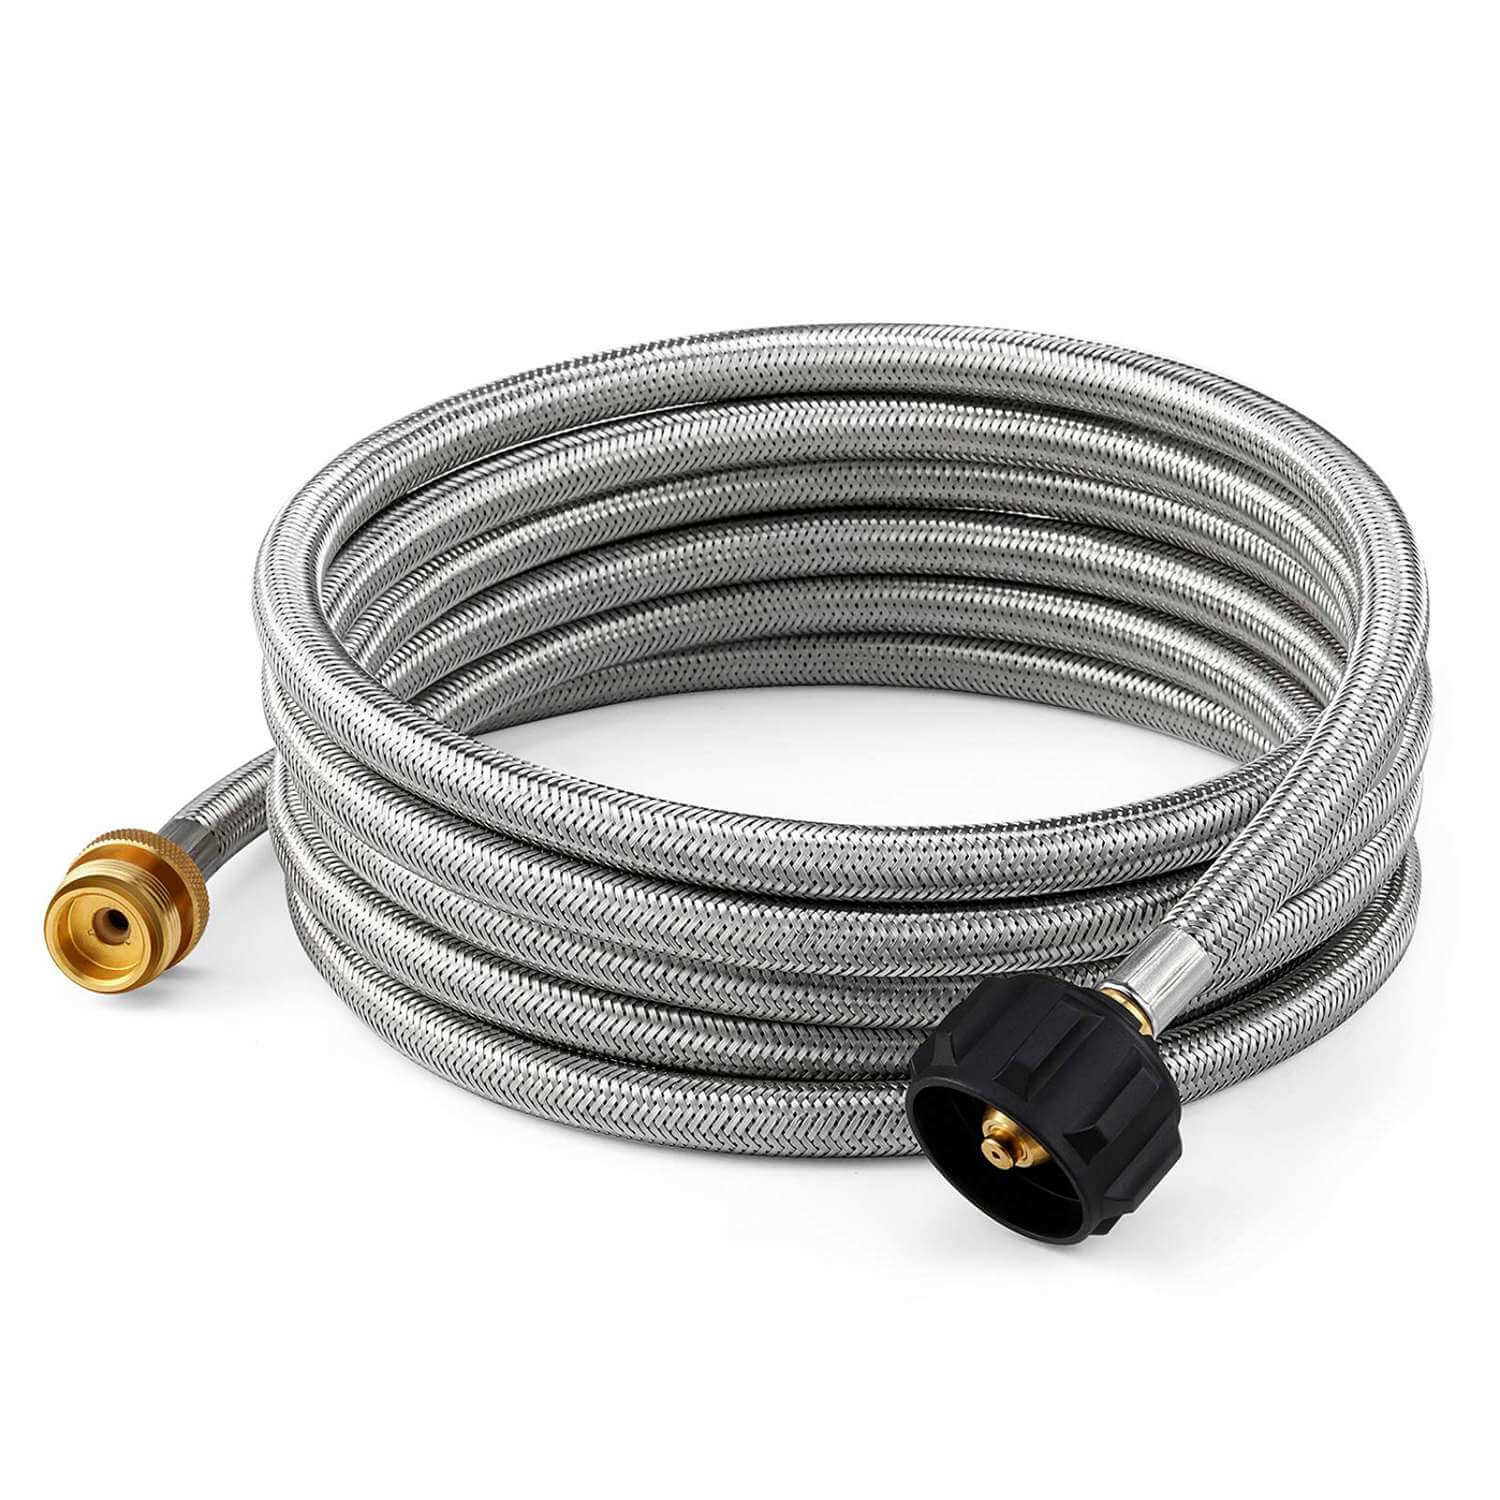 12 ft silver braided propane hose